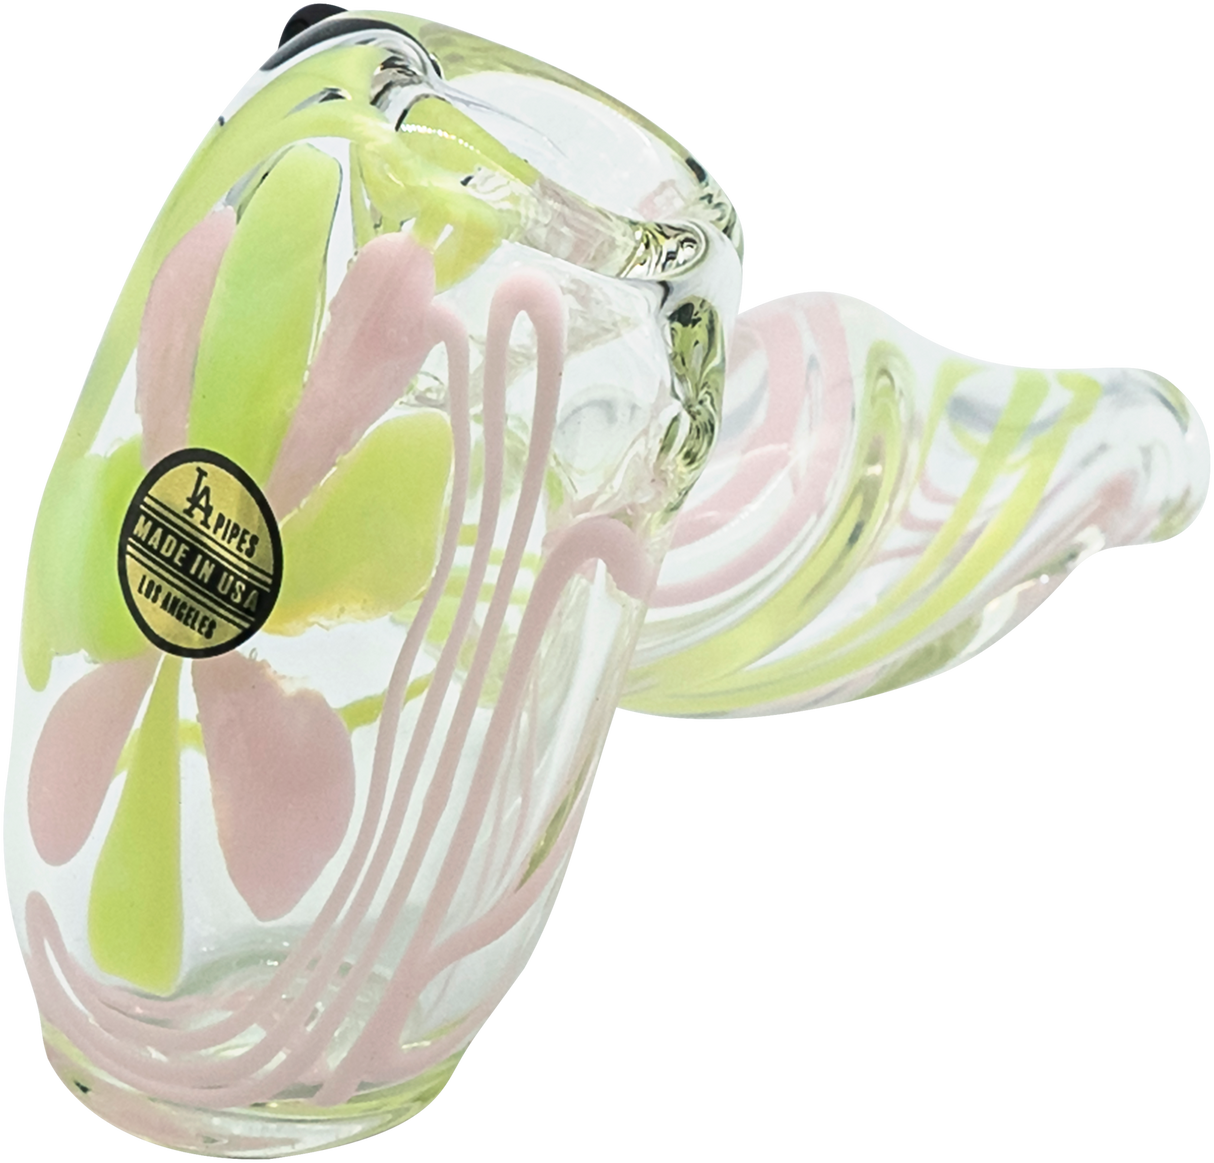 LA Pipes Green Slyme and Bubble Gum Twist Hammer Pipe, Sherlock Design, Side View